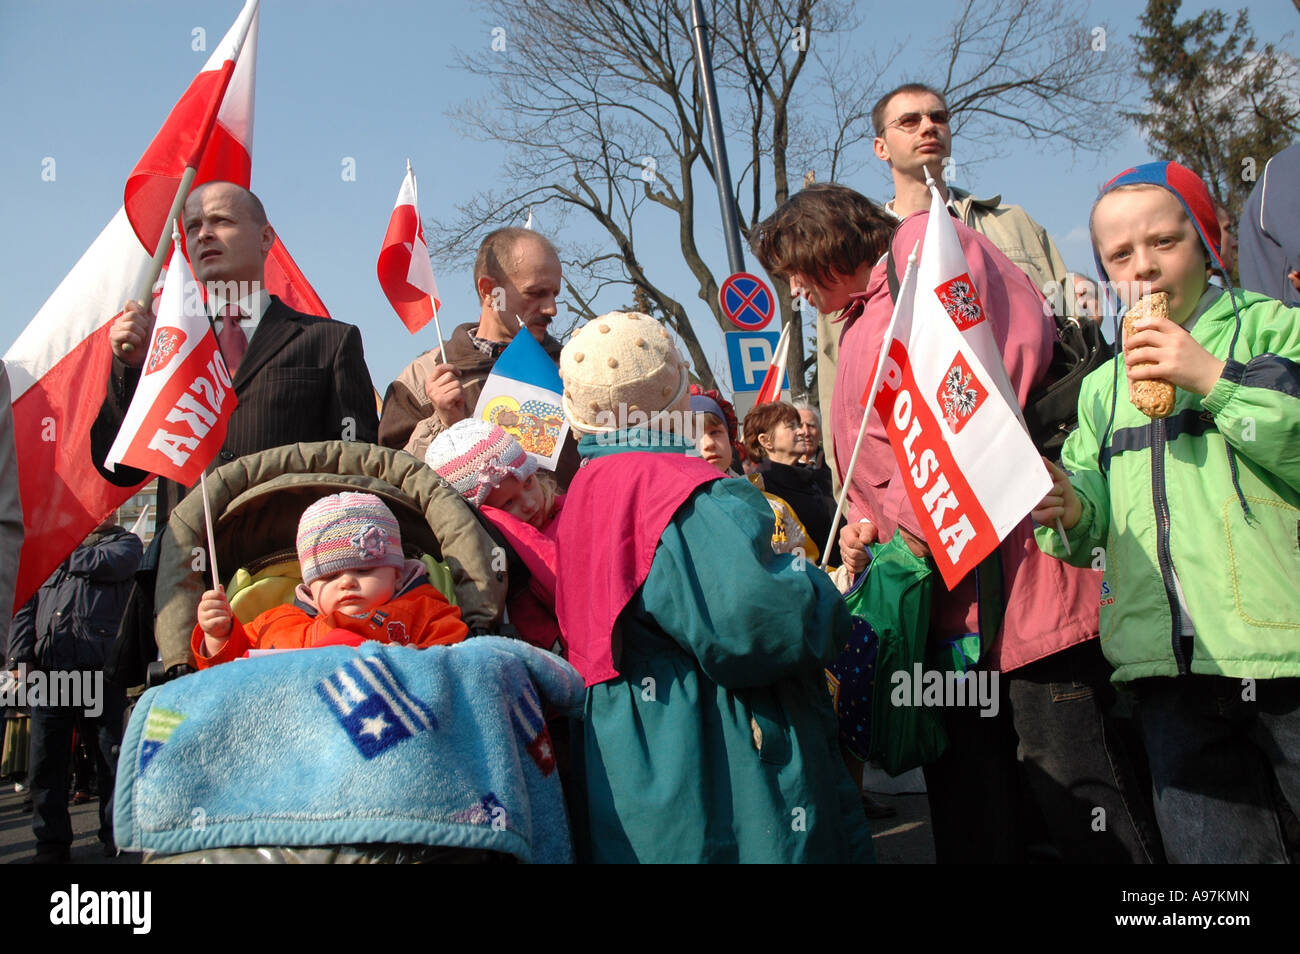 Family during anti-abortion demonstration in Warsaw Poland Stock Photo